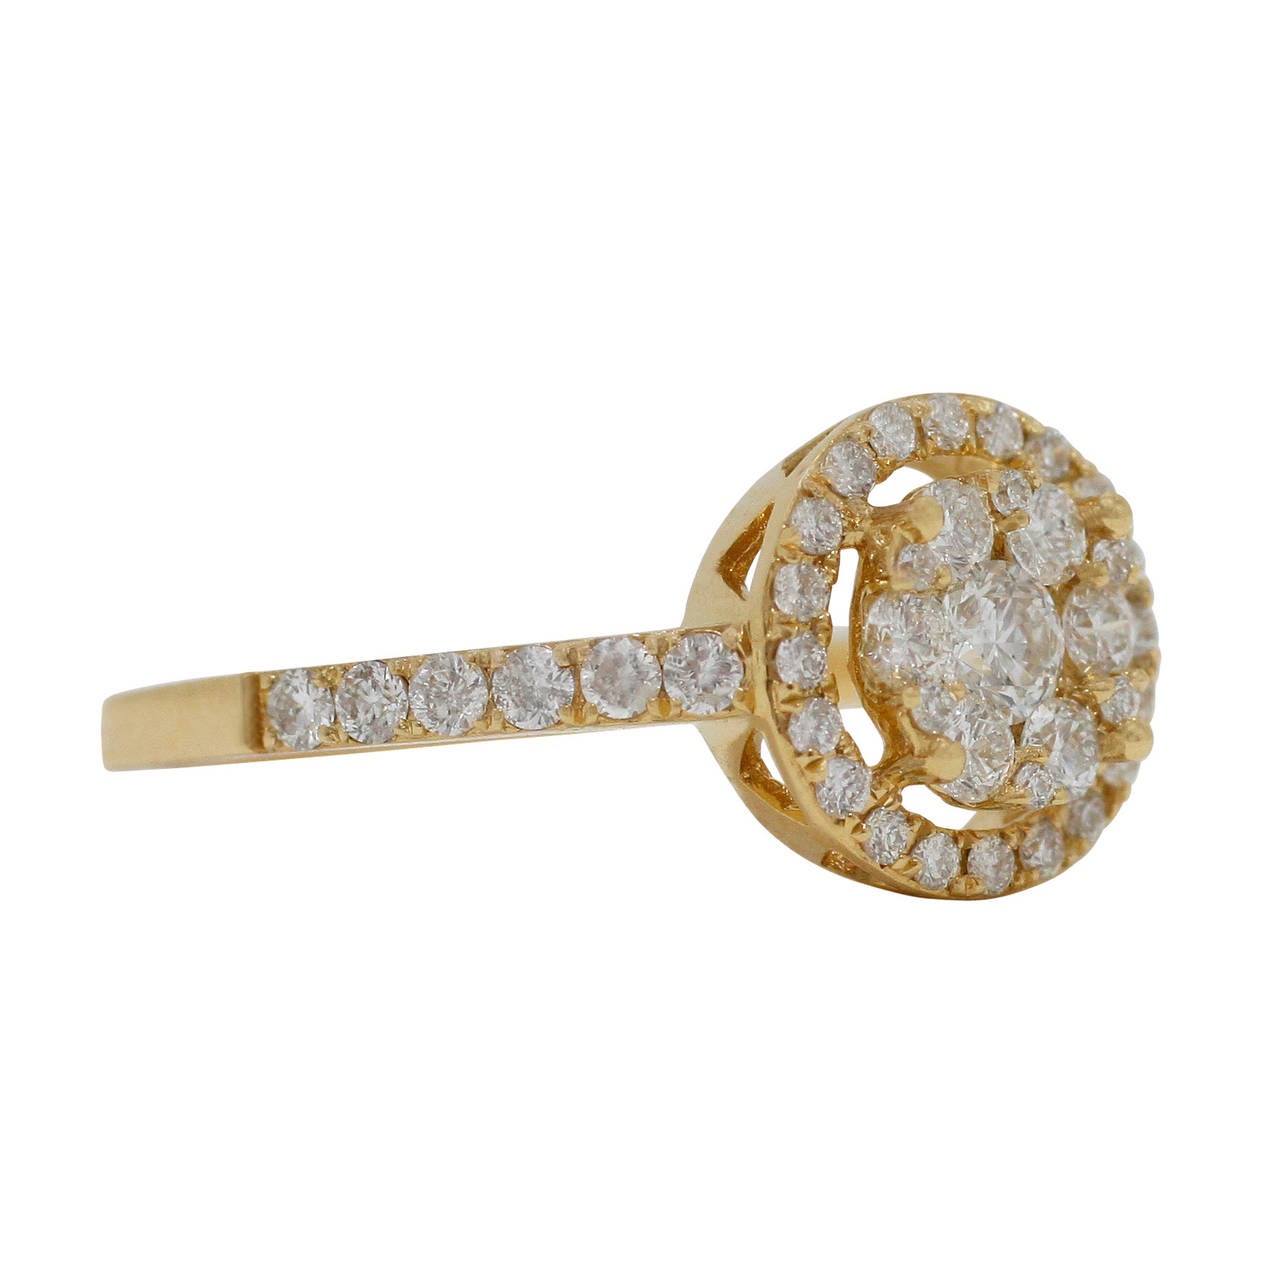 This absolutely gorgeous & elegant 18K Yellow Gold Ring, from Burdeen's Jewelry, has a center cluster of round diamonds and a round halo of diamonds.
The round brilliant cut diamonds are prong-set with mutual prongs in the round cluster. Four